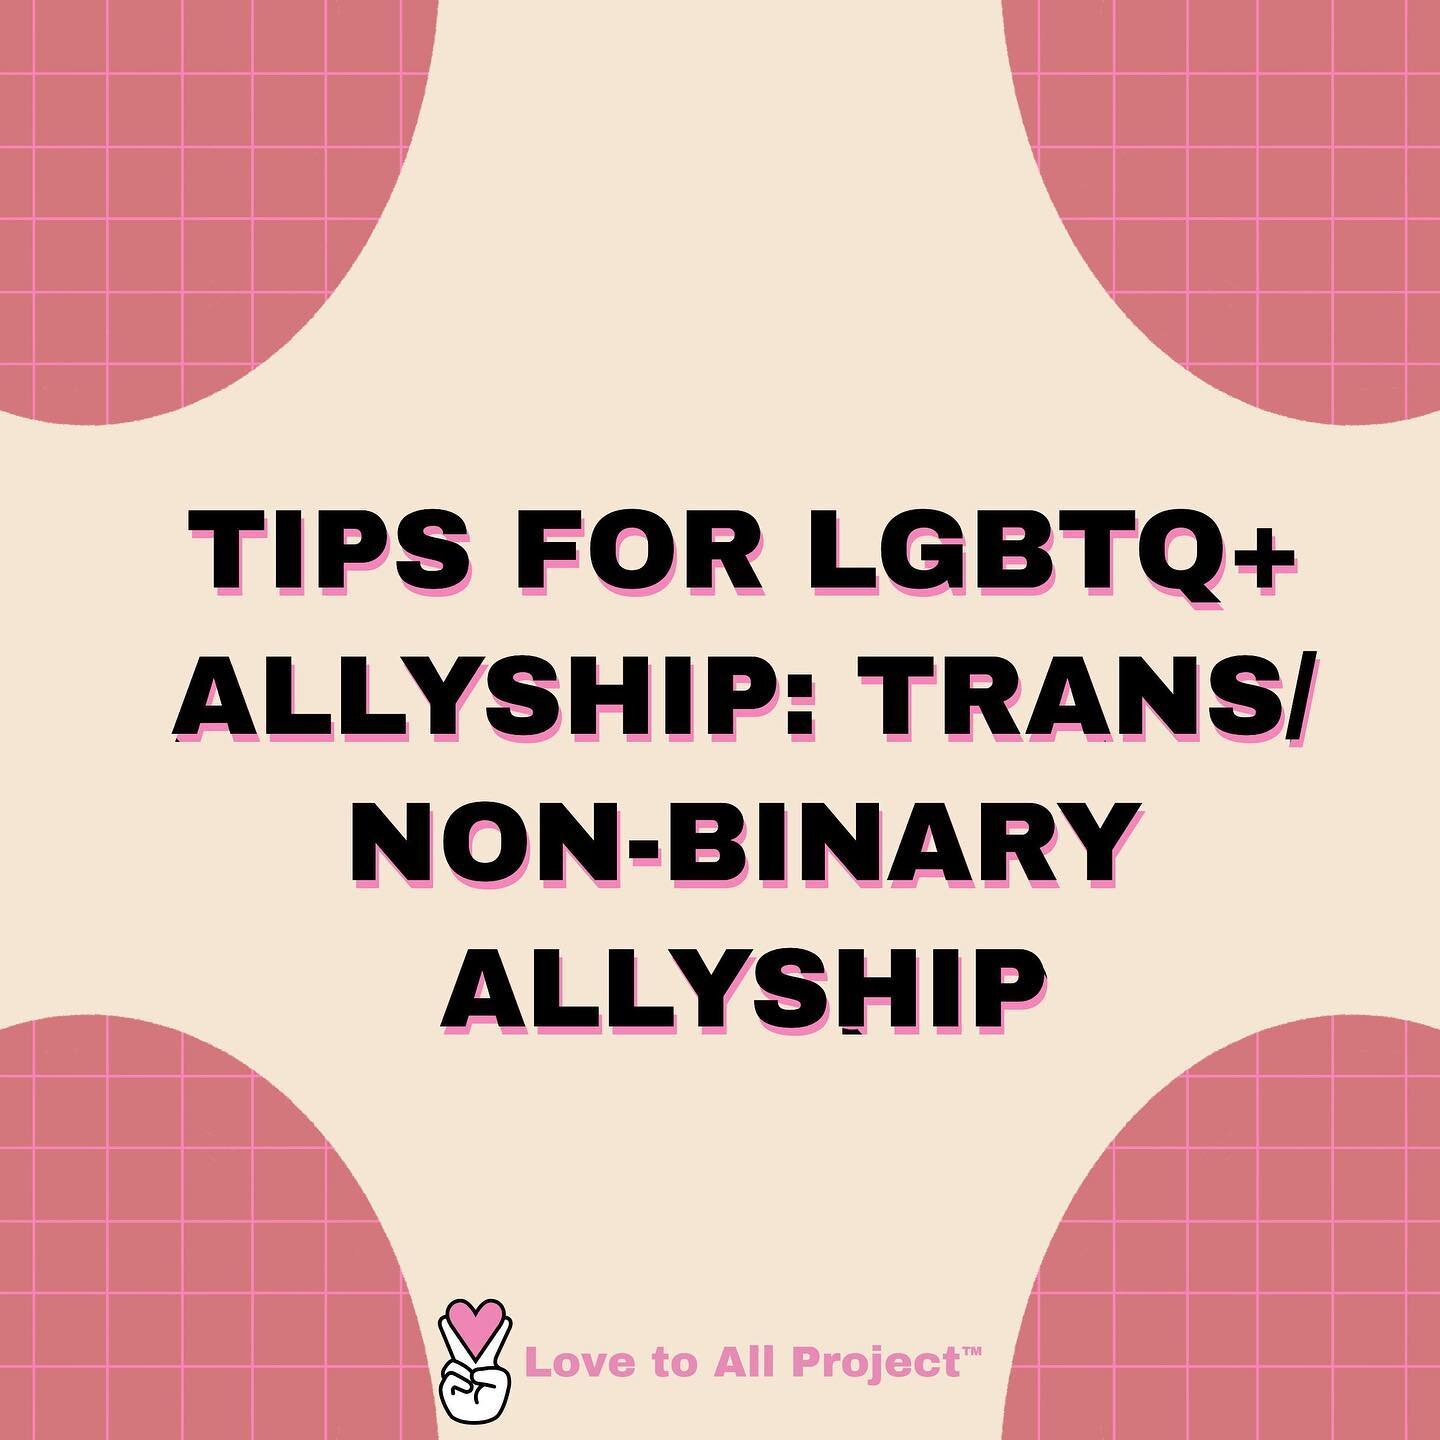 We compiled a list of ways that you can implement into your everyday life to be a better ally to trans/non-binary people &ndash; swipe to read! 🌈💘
⁣
Written by Marsh Henderson⁣
Designed by Isidore Douglass-Skinner